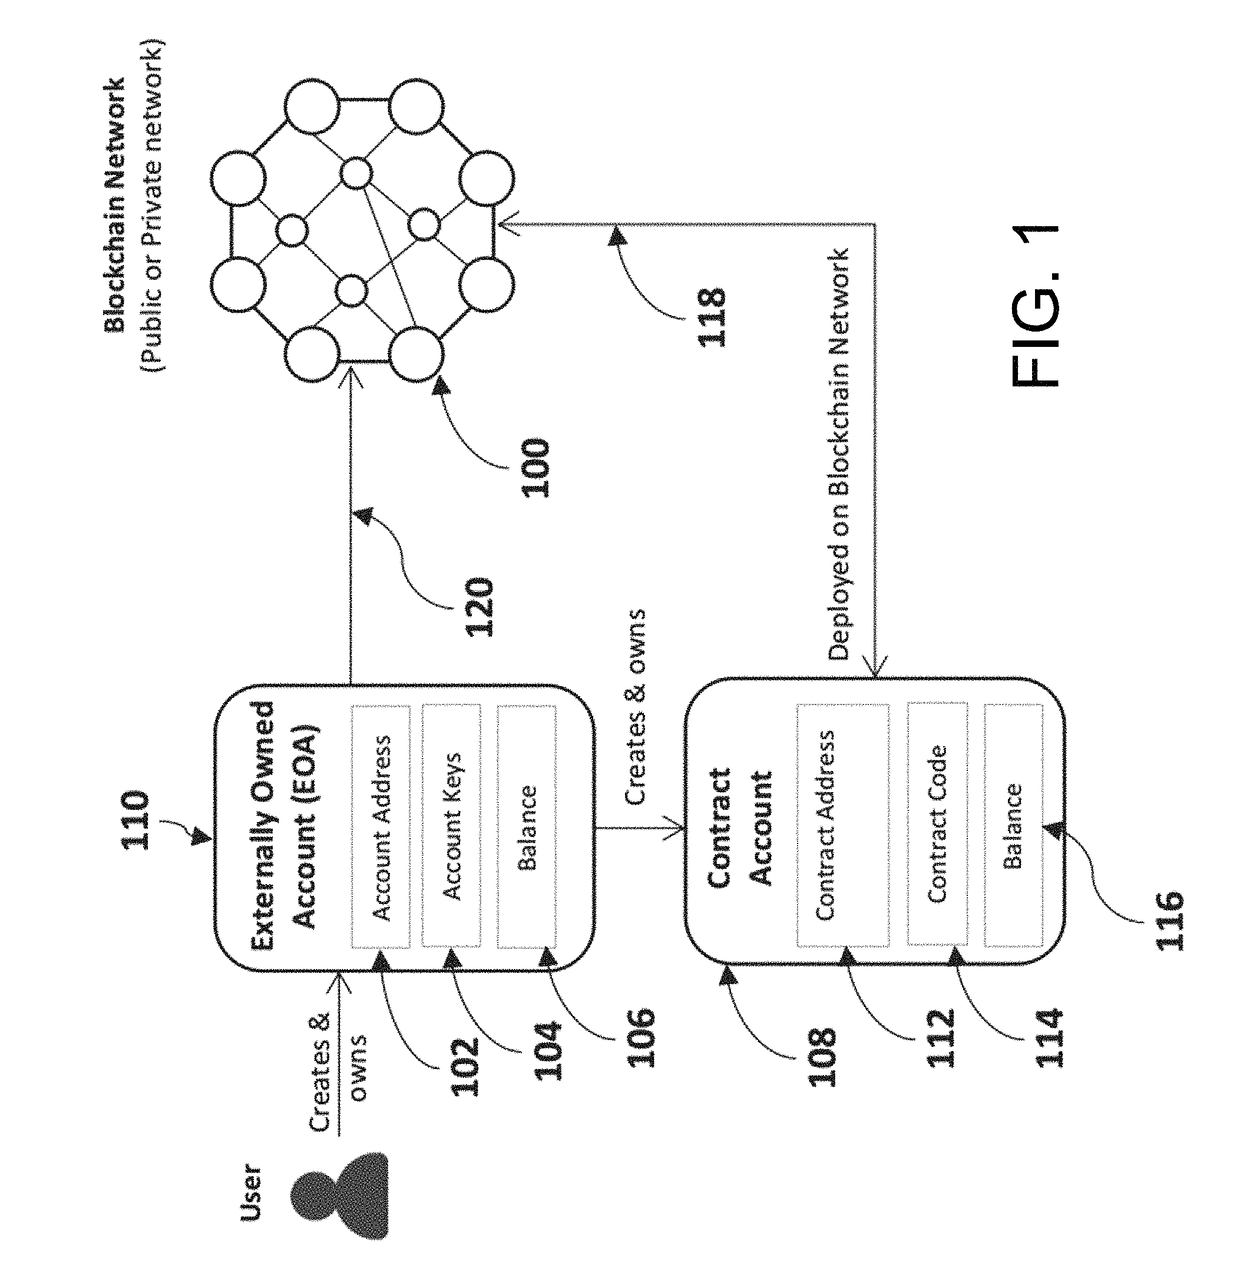 Method and system for tuning blockchain scalability for fast and low-cost payment and transaction processing